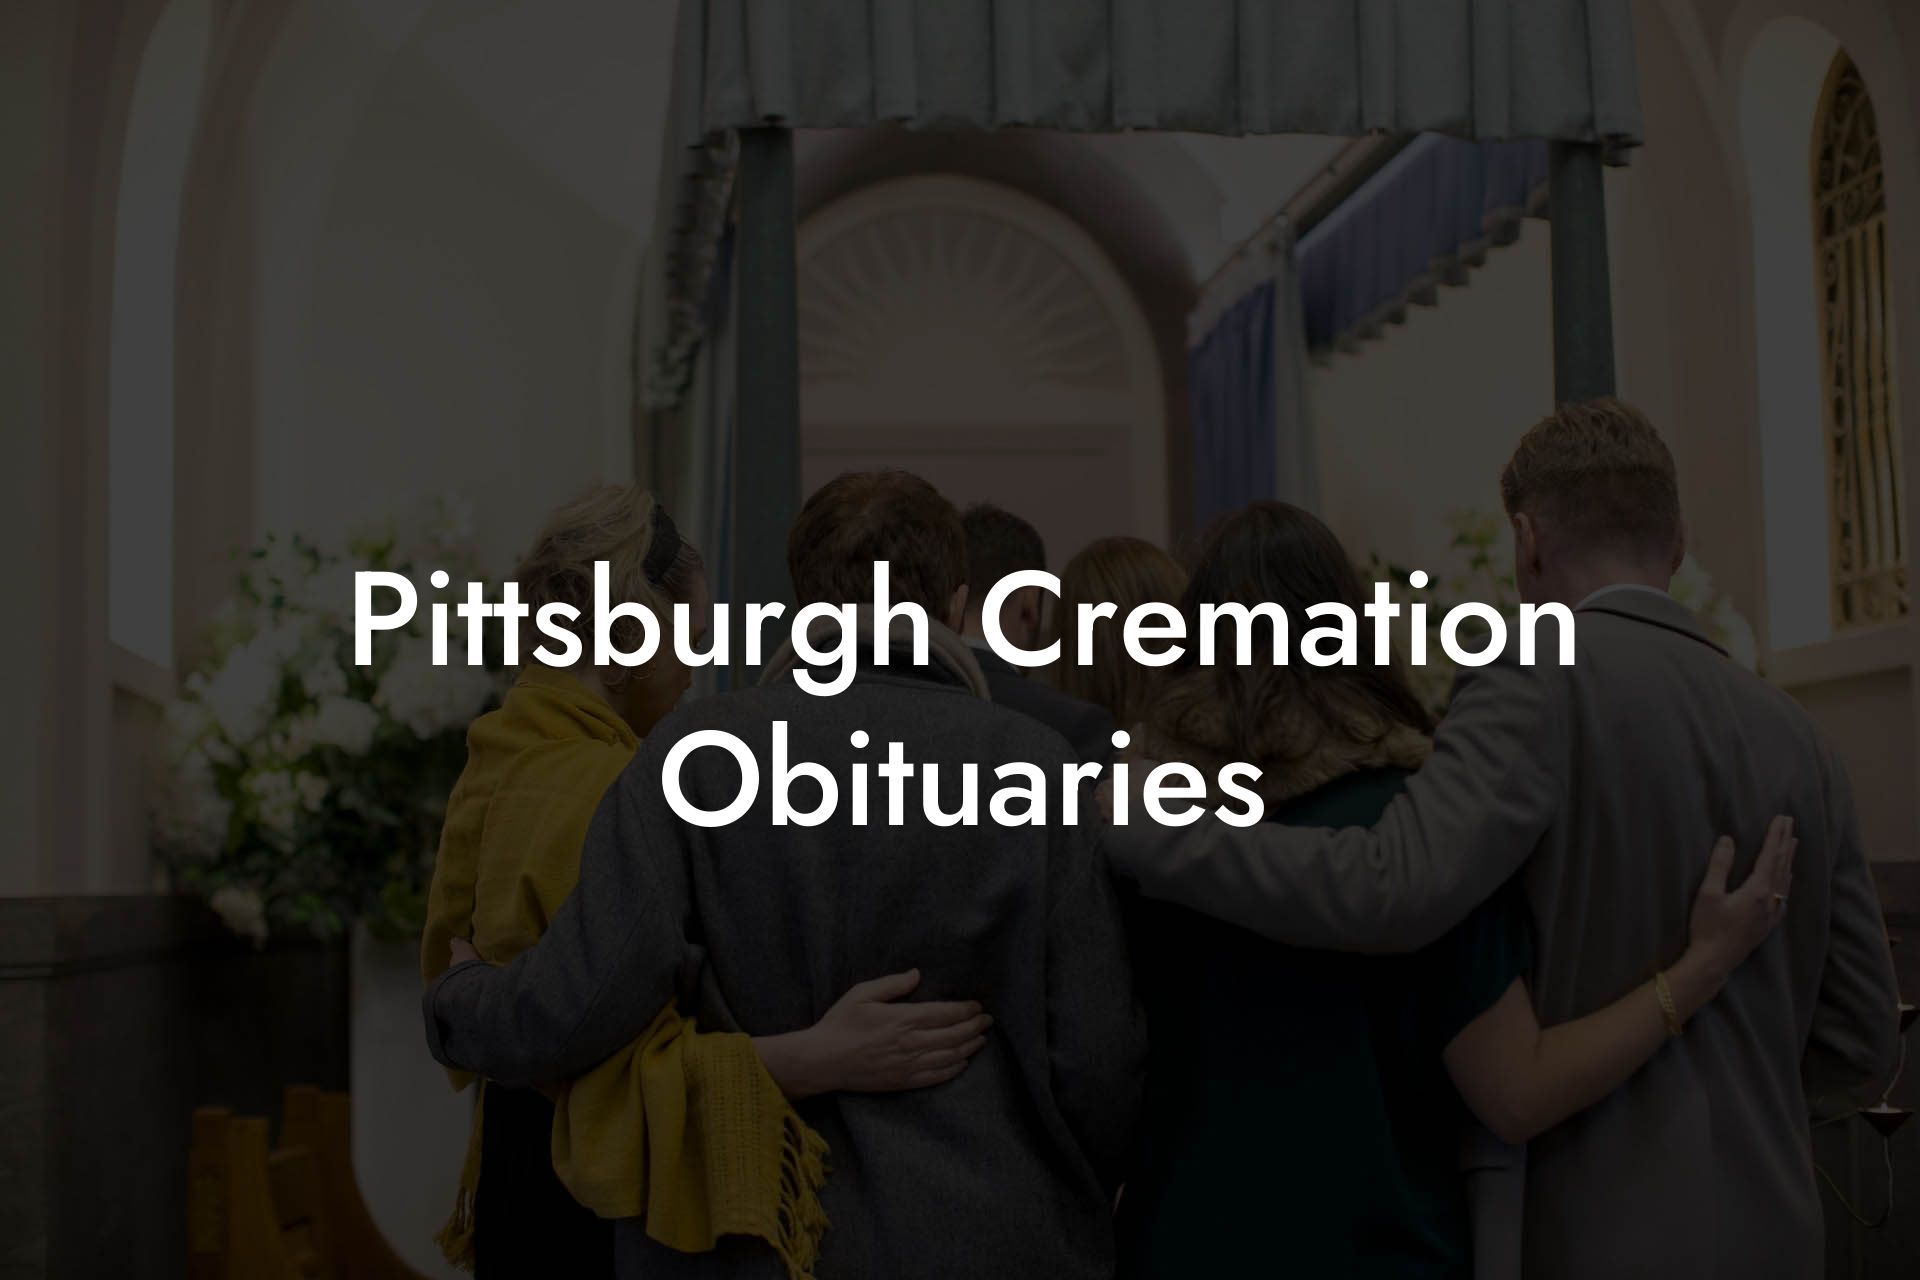 Pittsburgh Cremation Obituaries